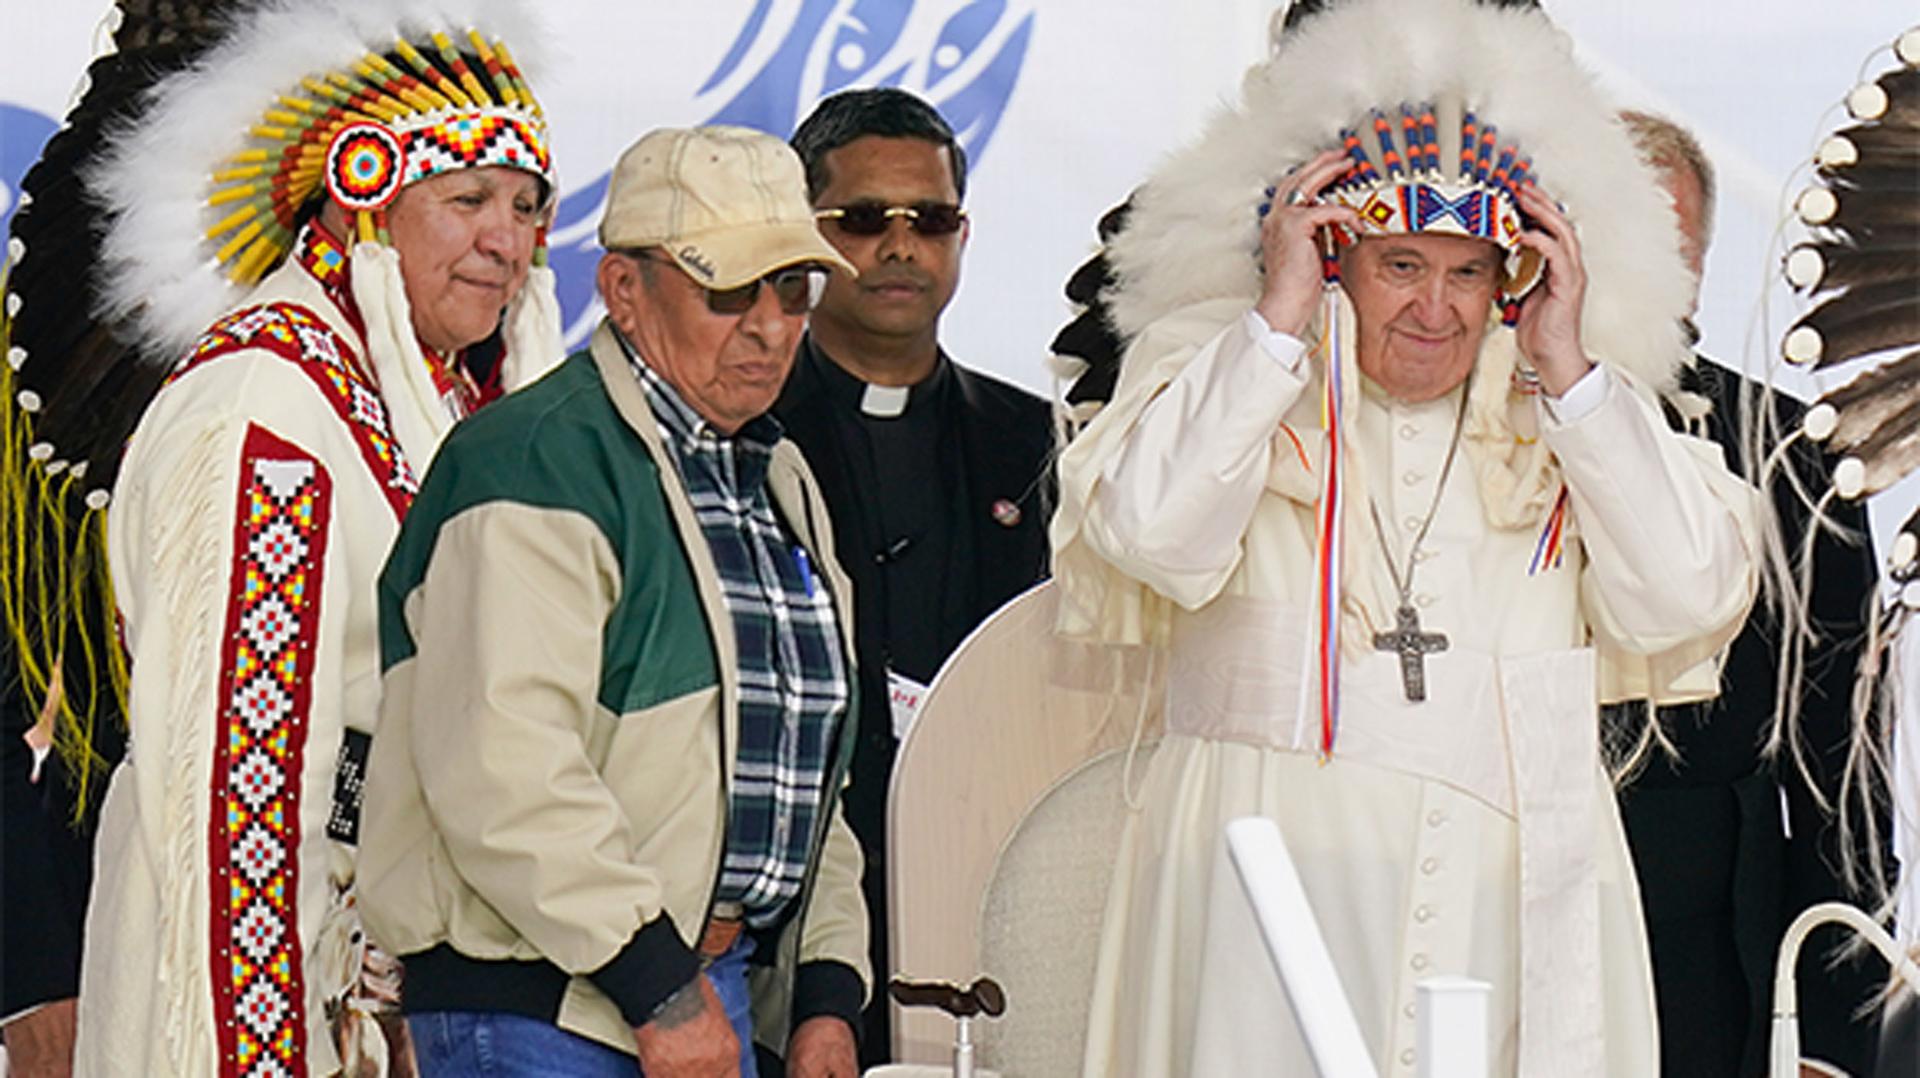 Pope Francis dons a headdress during a visit with Indigenous peoples at Maskwaci, the former Ermineskin Residential School, in Maskwacis, Alberta, Canada